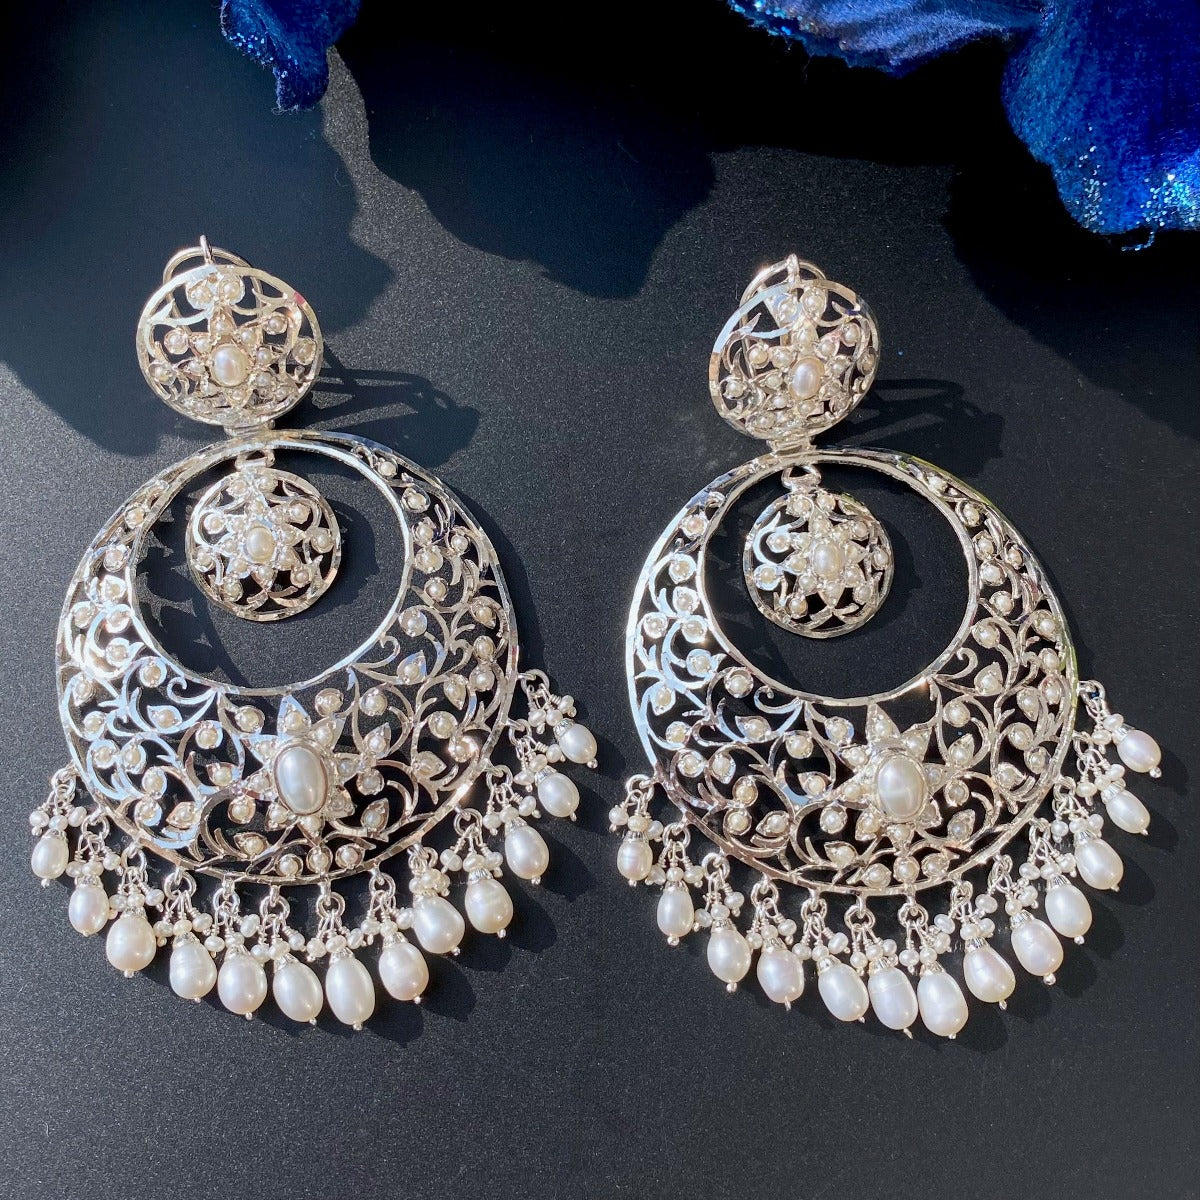 big chandbali earrings in sterling silver studded with pearls